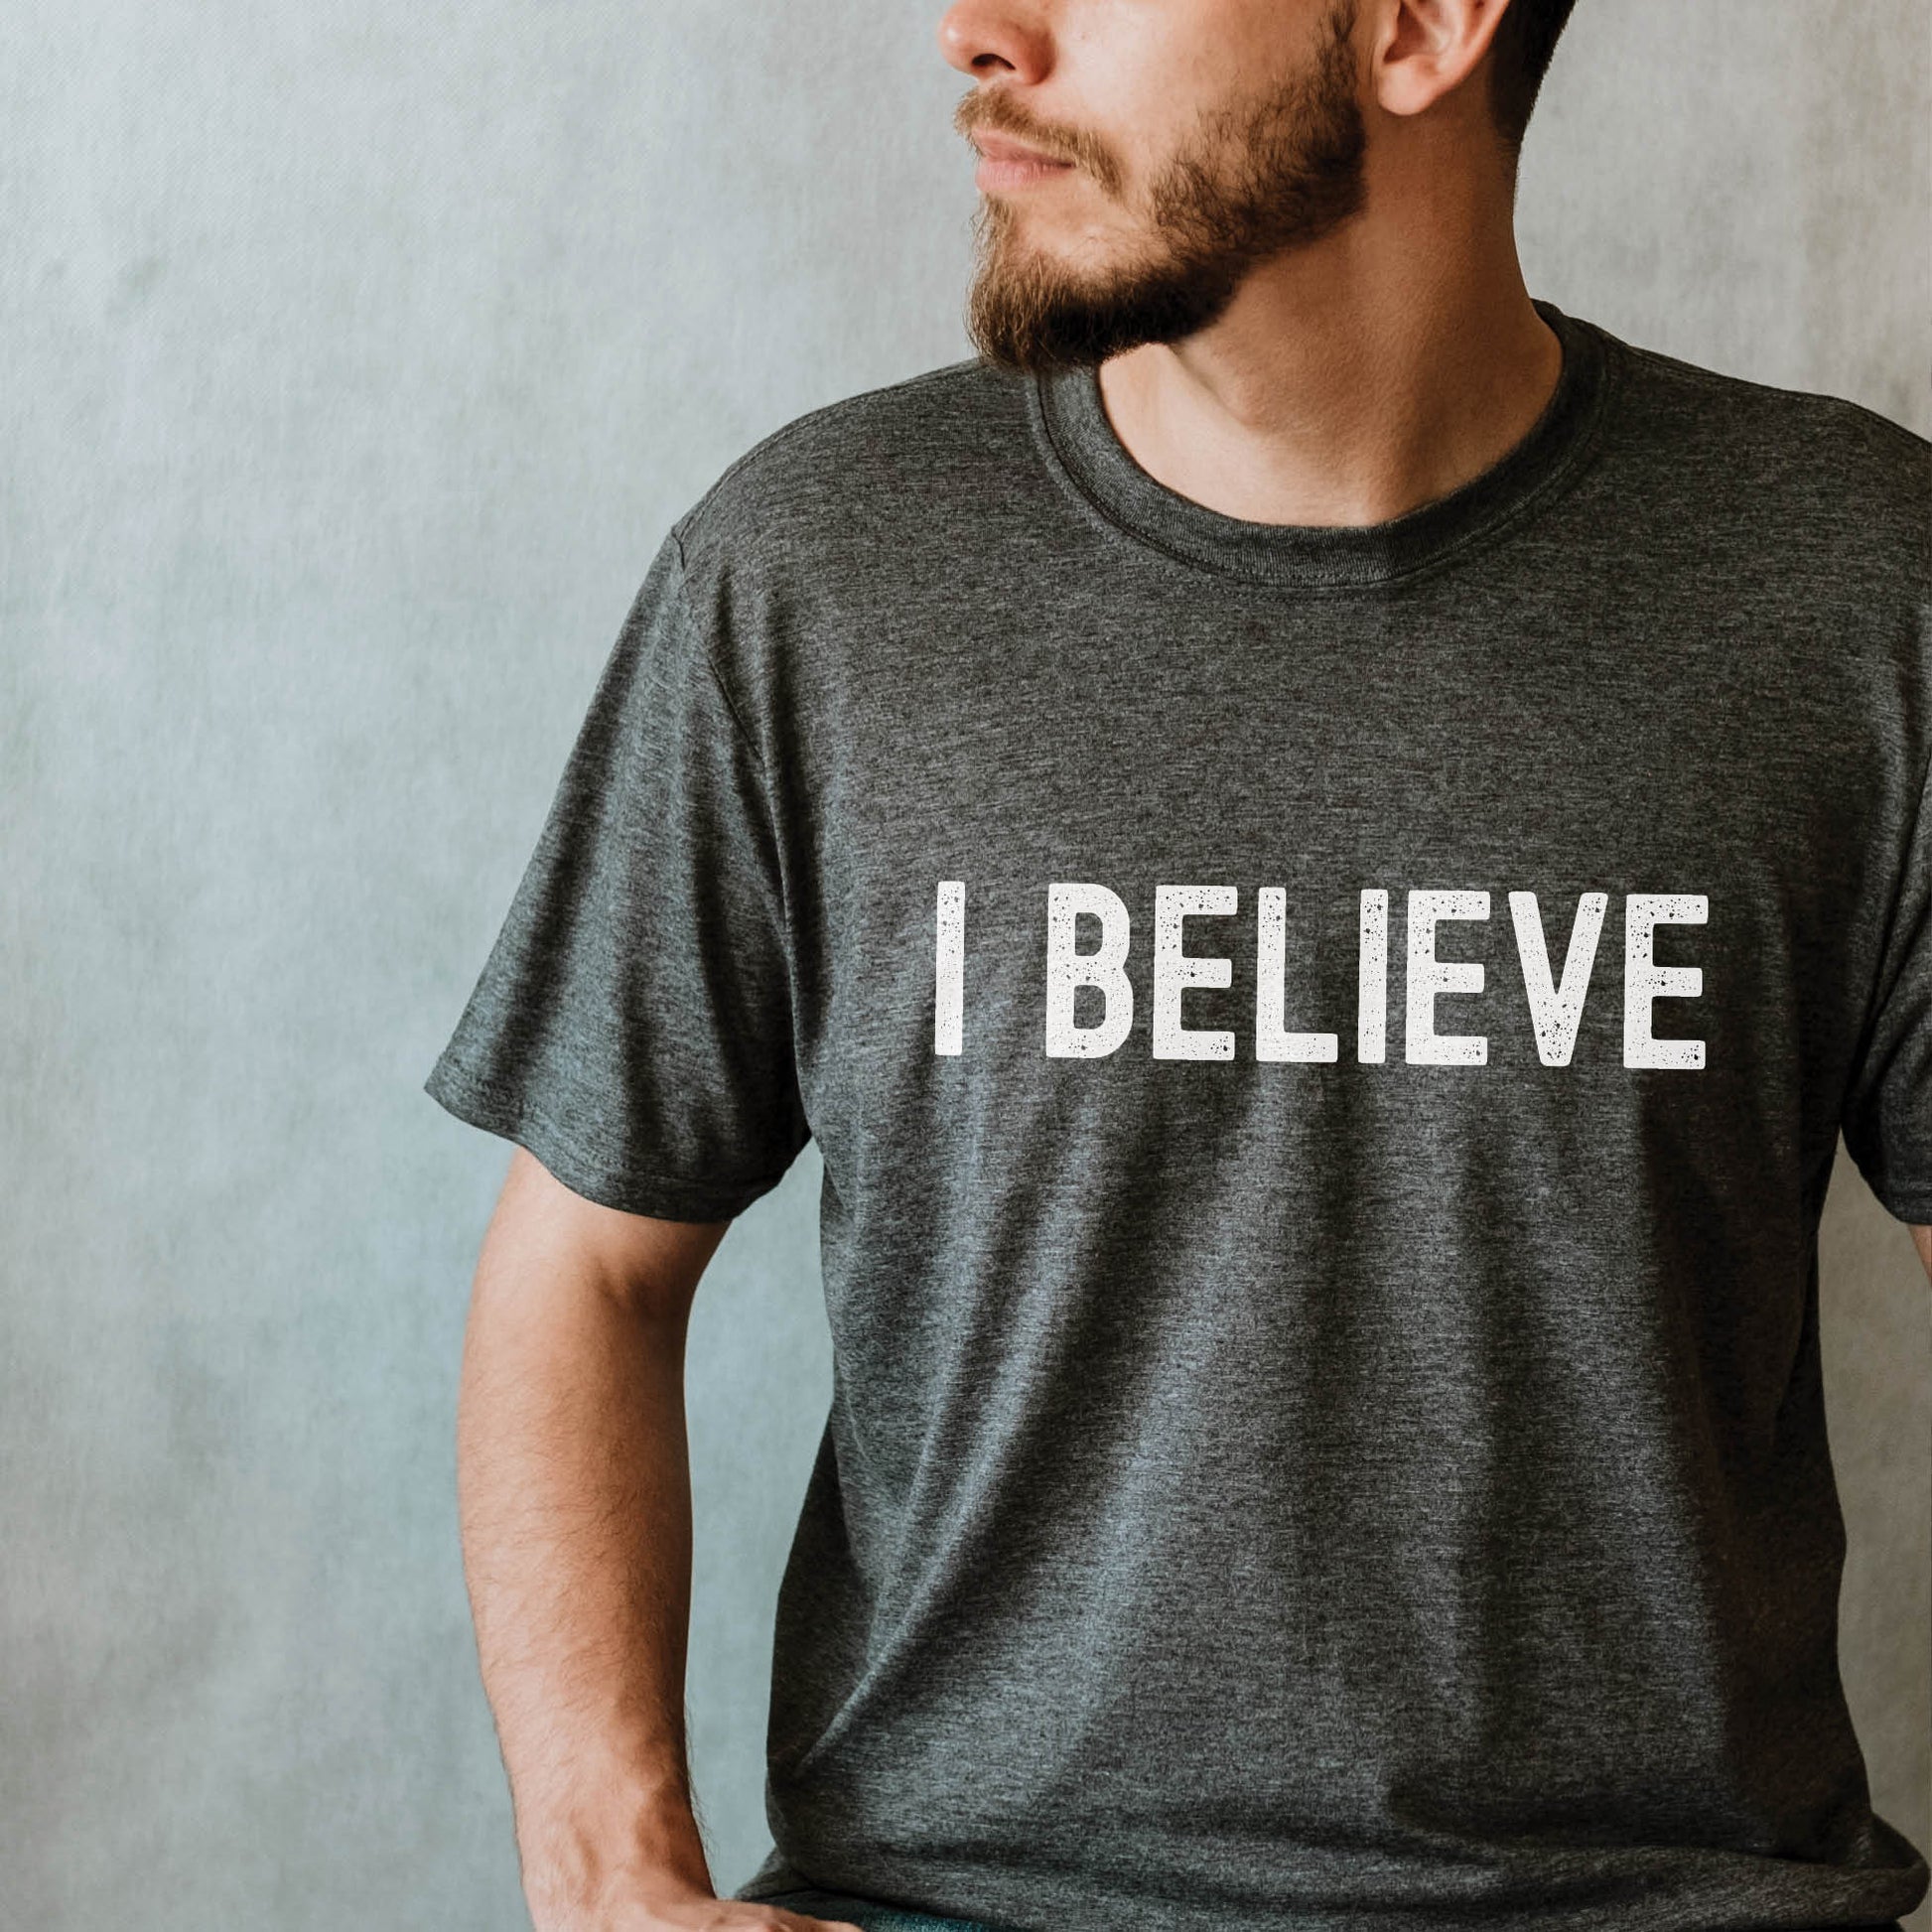 Young man wearing an I BELIEVE Christian aesthetic faith-based bold statement distressed typography t-shirt design printed in white on a heather dark gray unisex fit t-shirt, designed for men & women believers